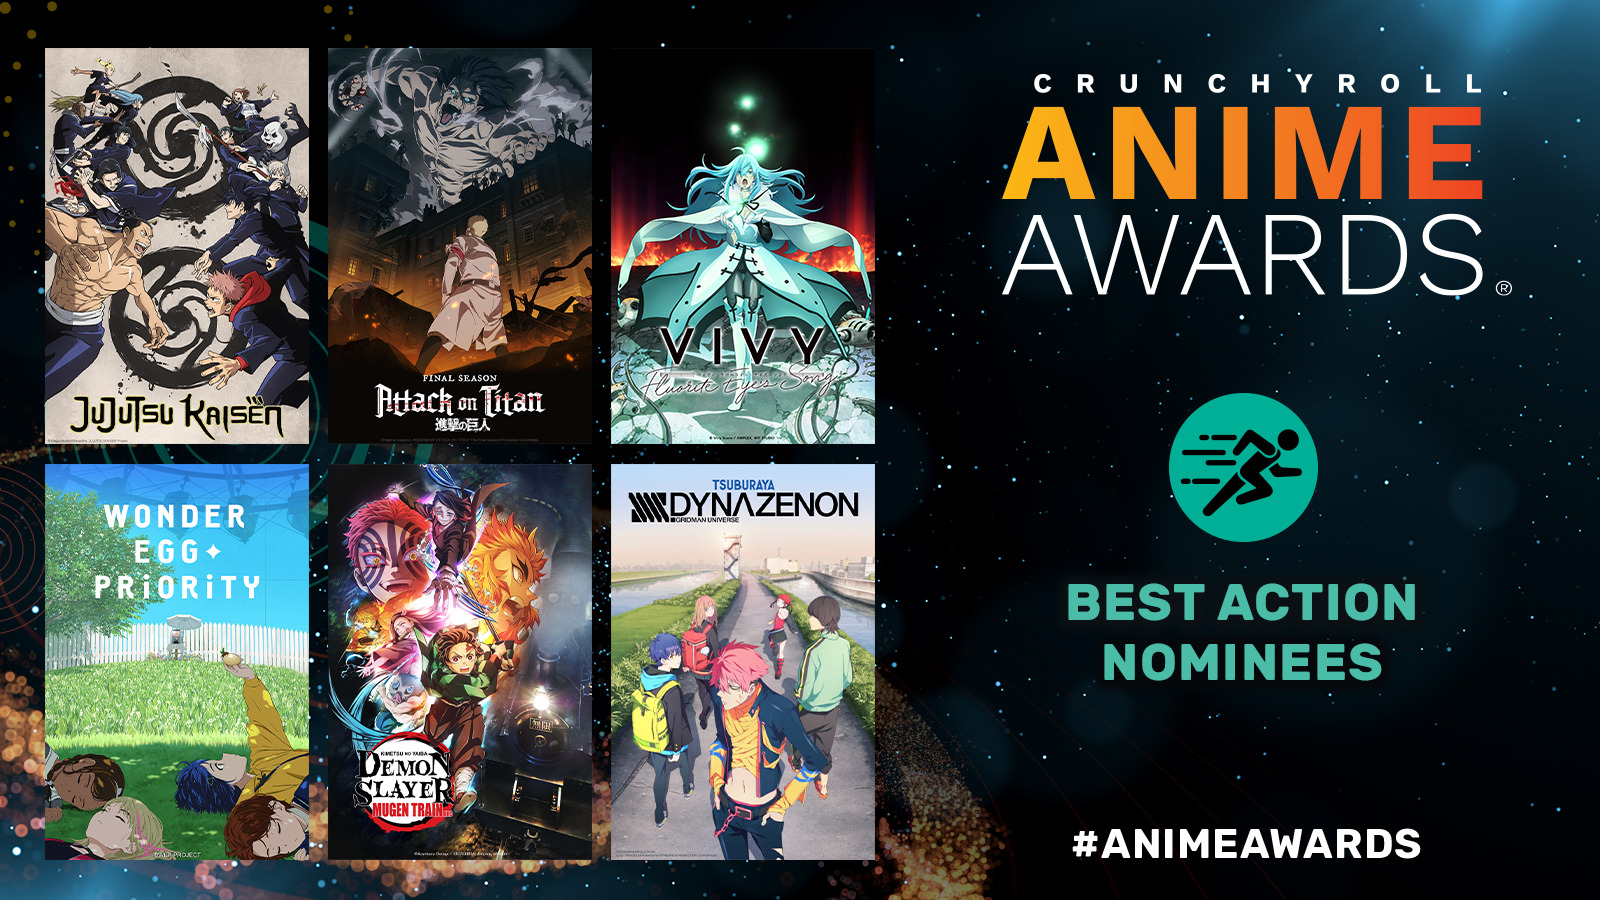 Attack on Titan with 12 nominations in the Crunchyroll Anime